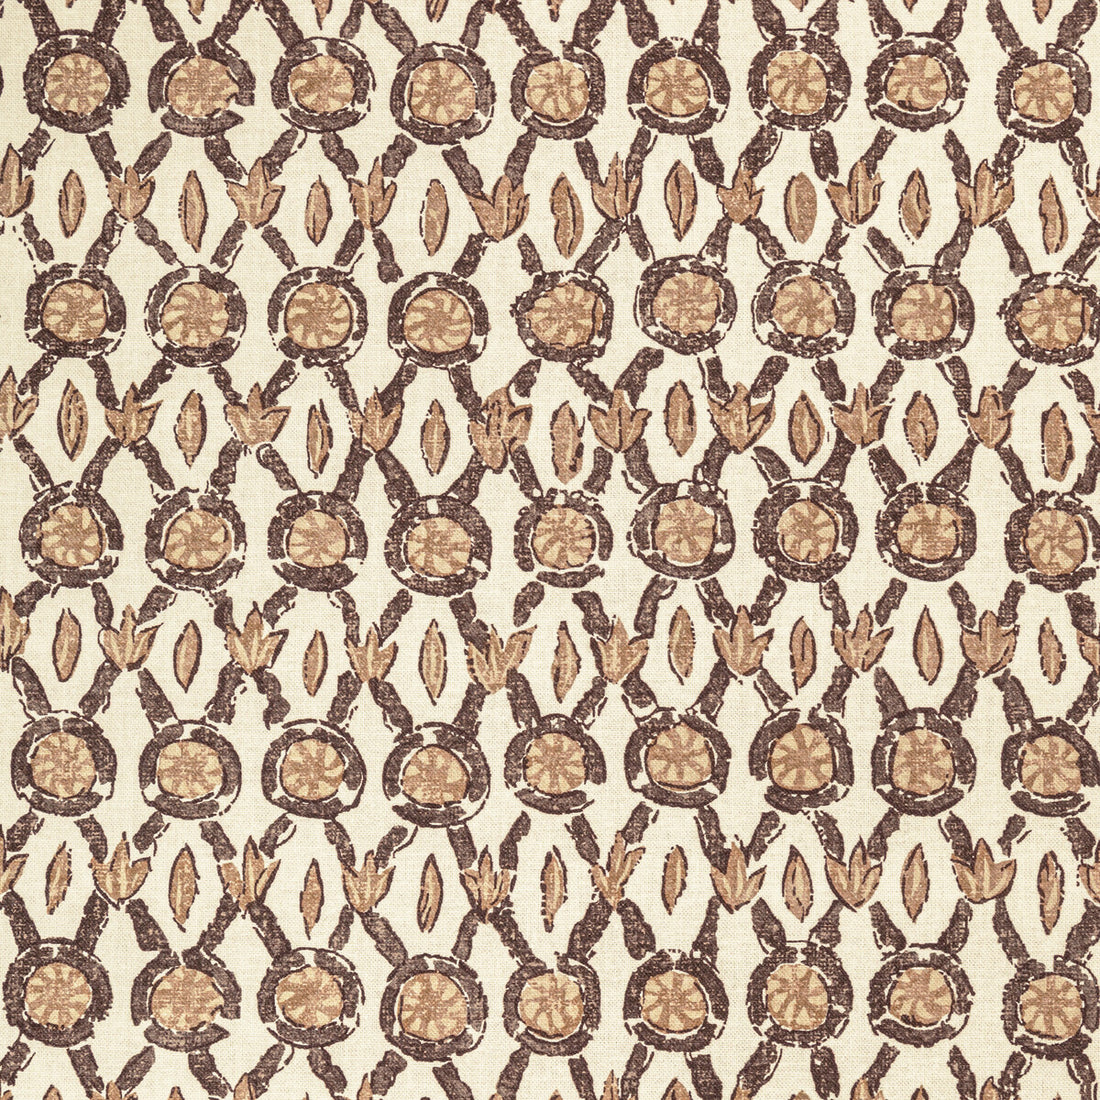 Galon Print fabric in mocha color - pattern 8022103.616.0 - by Brunschwig &amp; Fils in the Manoir collection